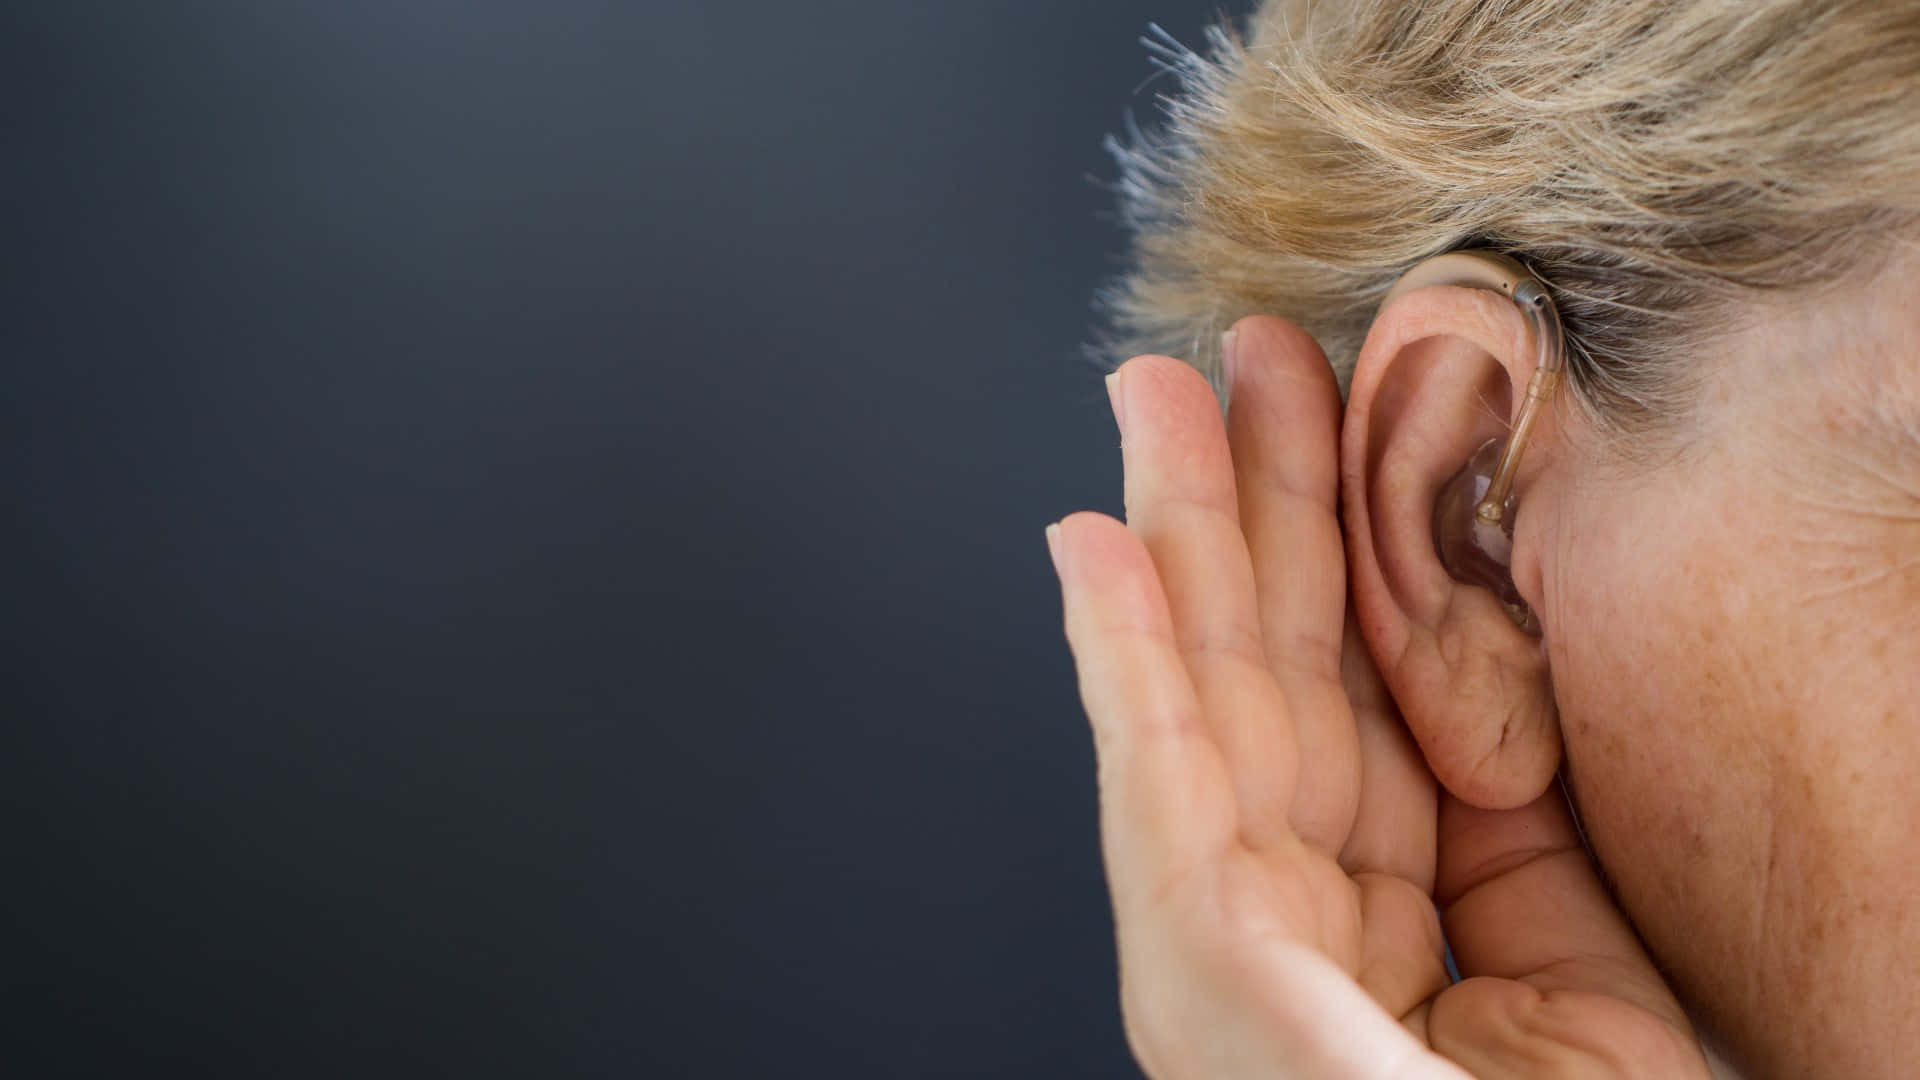 Listening Hearing Aid Background